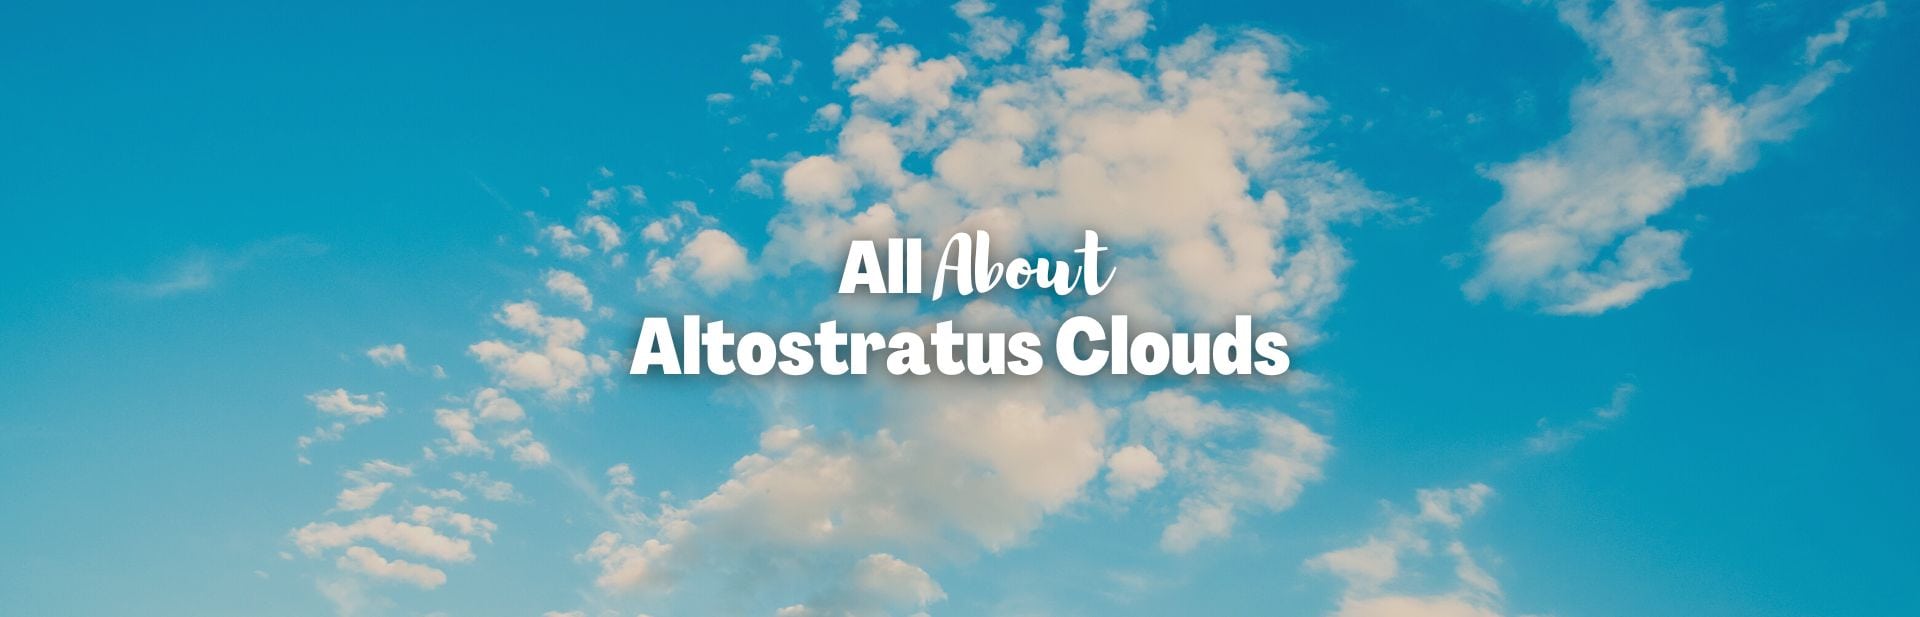 What Are Altostratus Clouds and How Do They Form?